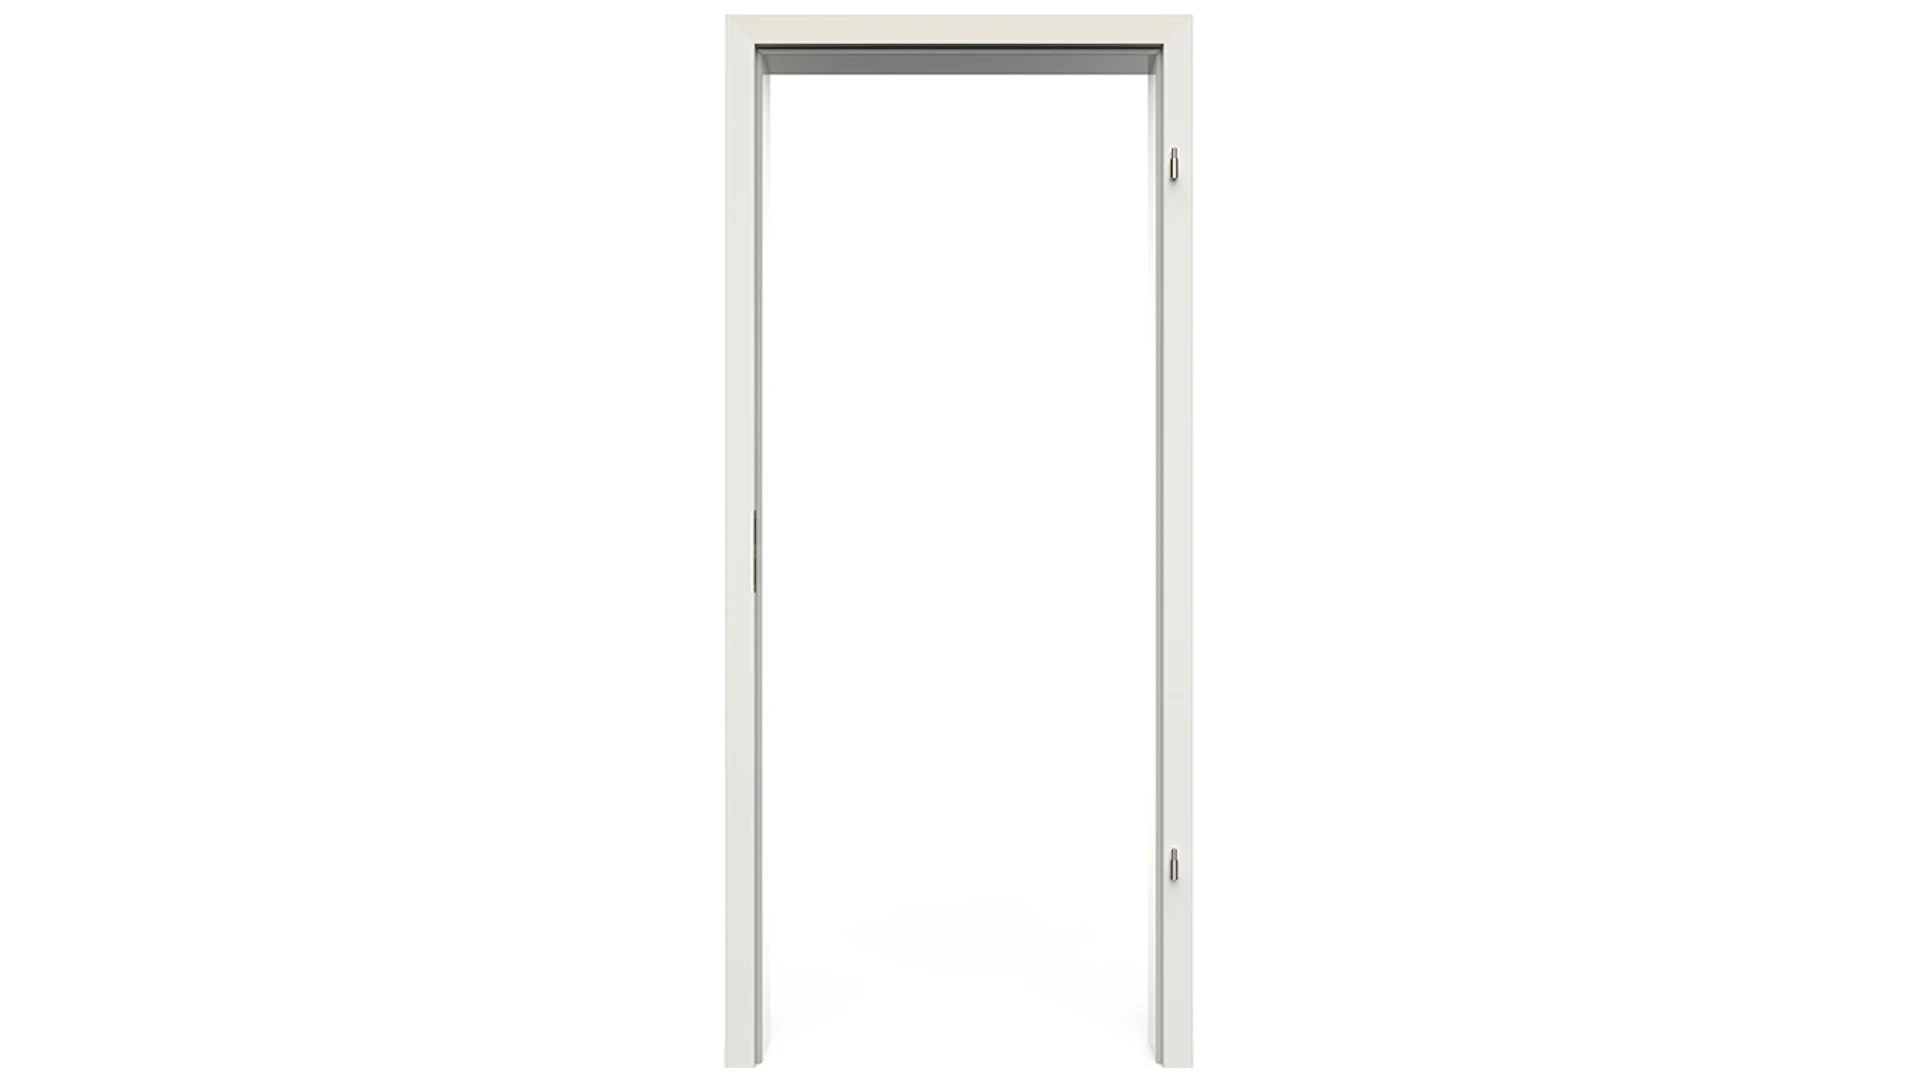 planeo Standard frame, rounded edge - CPL White 9010 - 2110 x 860 x 100 mm DIN right